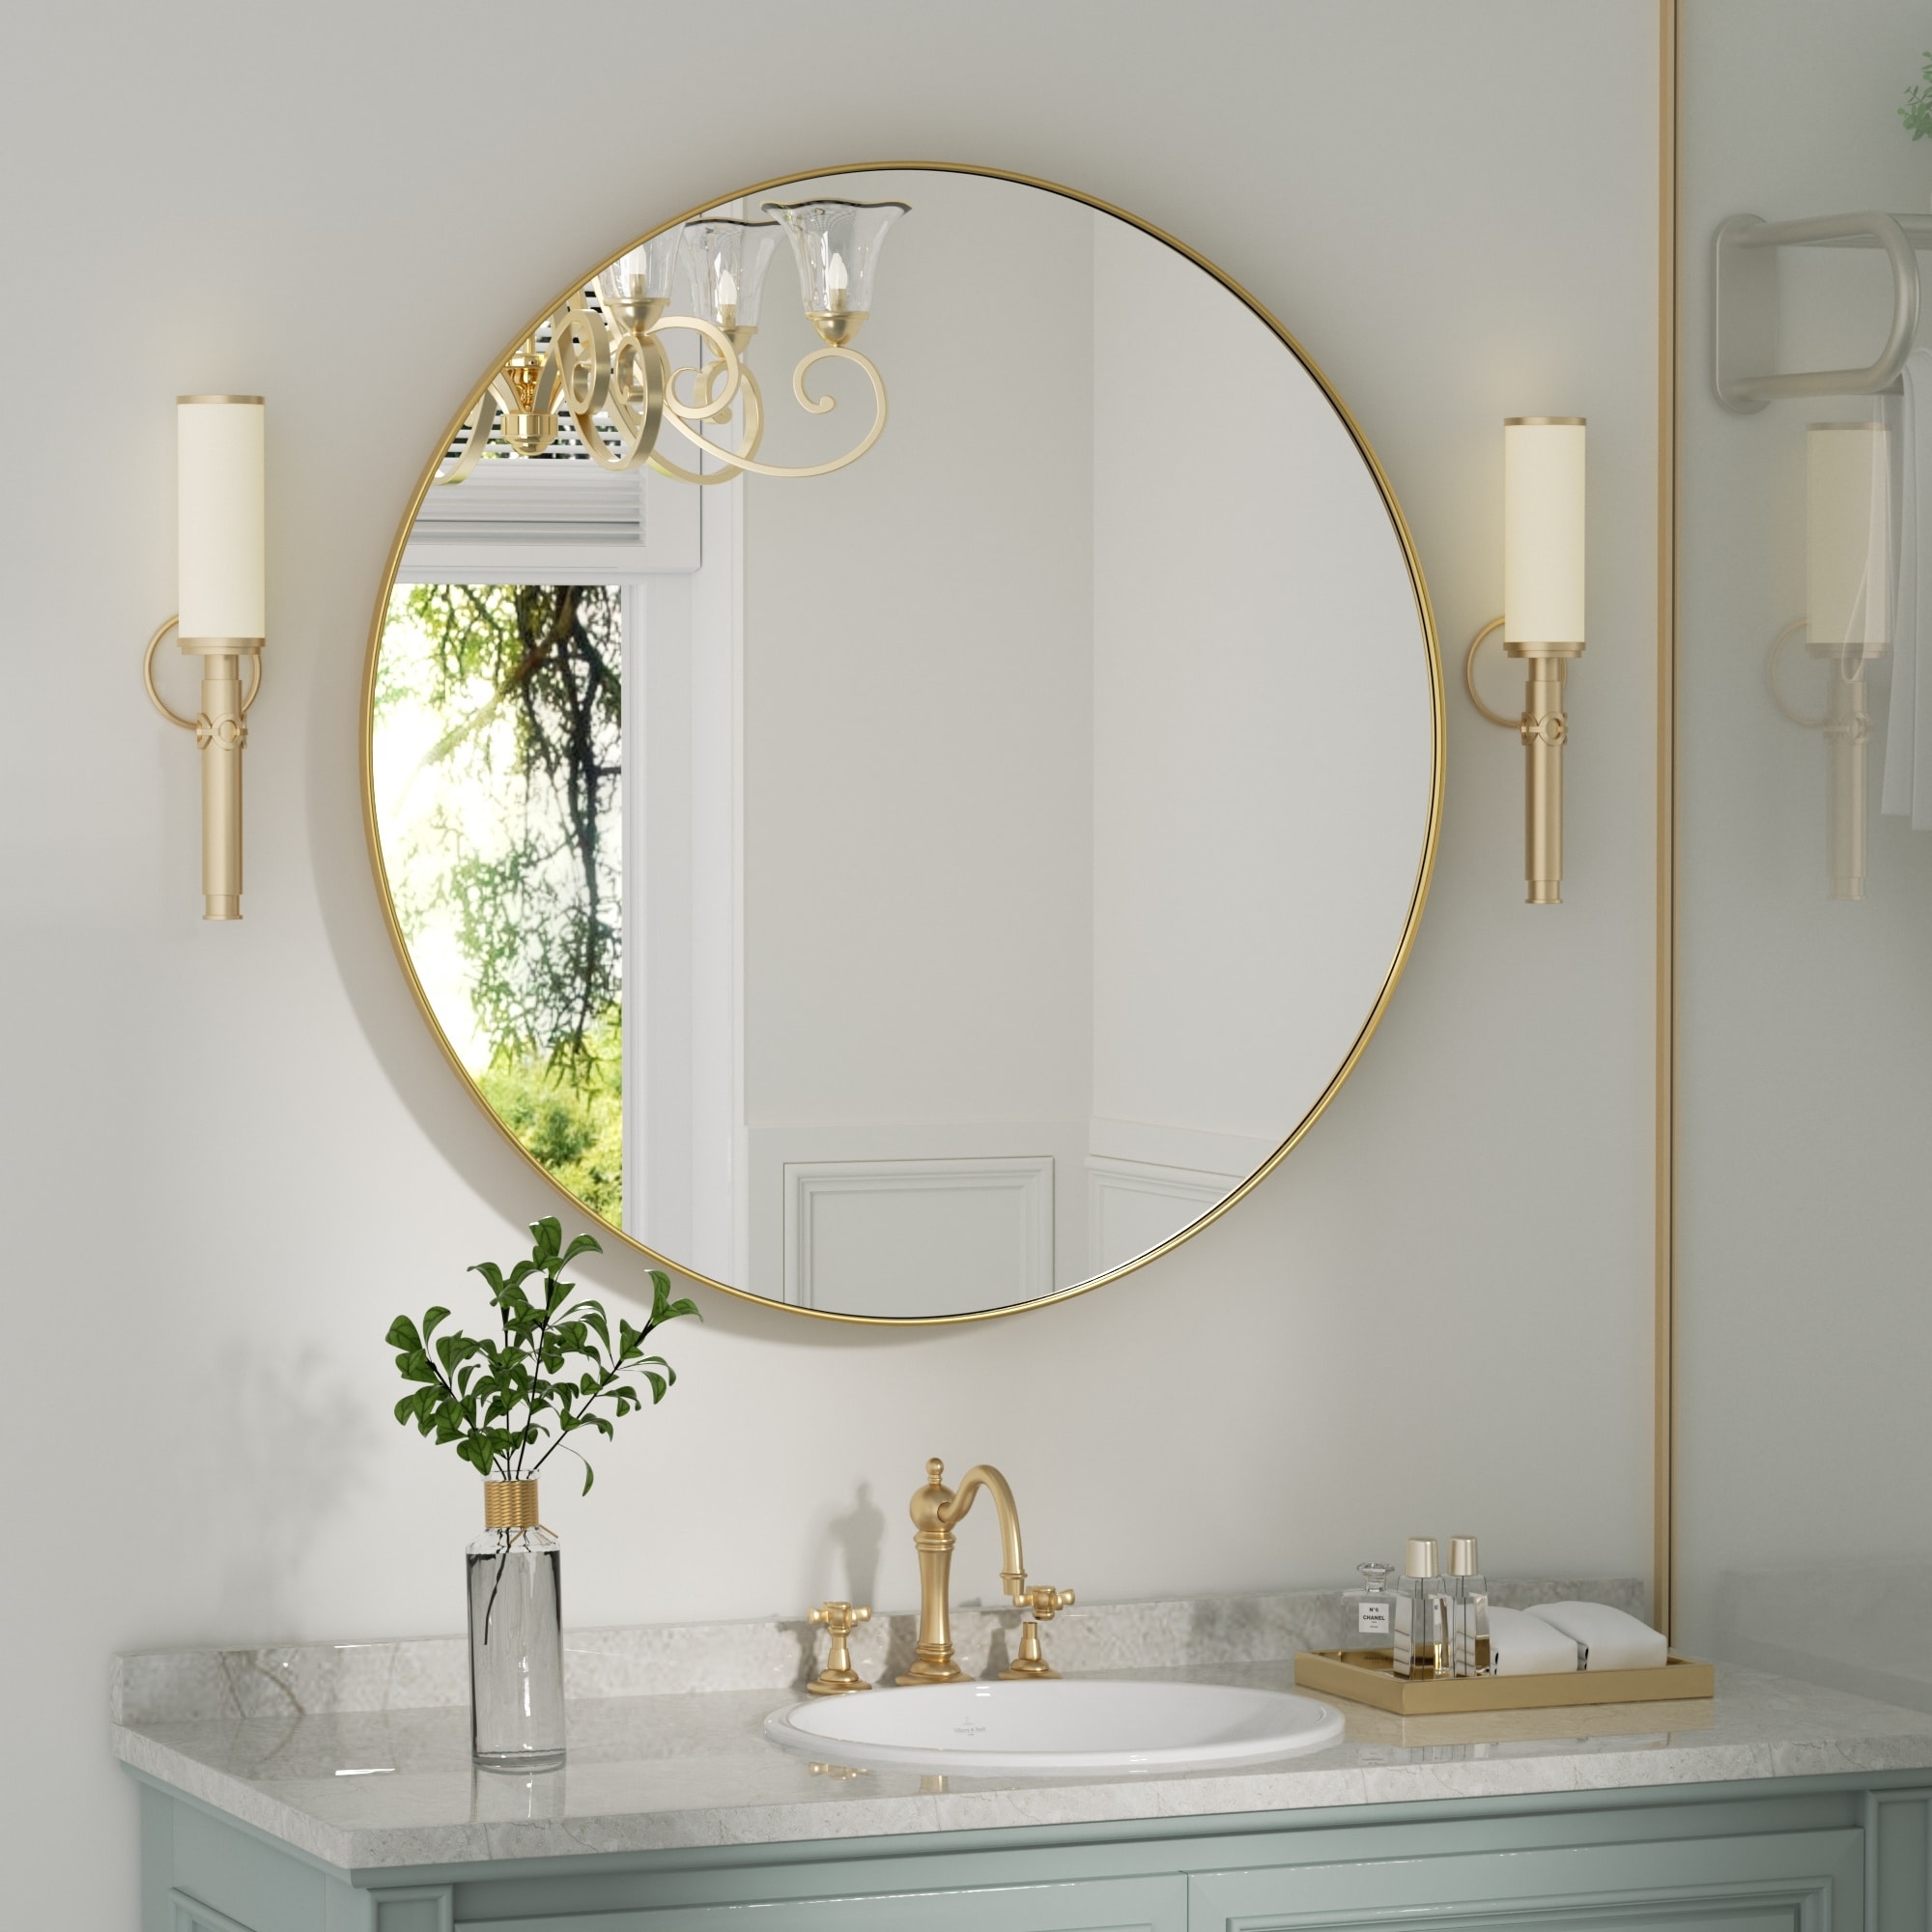 https://ak1.ostkcdn.com/images/products/is/images/direct/5f2e1f762d07e8f7759a1f3333dd400b6415c3ad/Wall-Mirror-Vanity-Mirror-Bathroom-Mirror-with-Metal-Frame%281-Piece%29.jpg